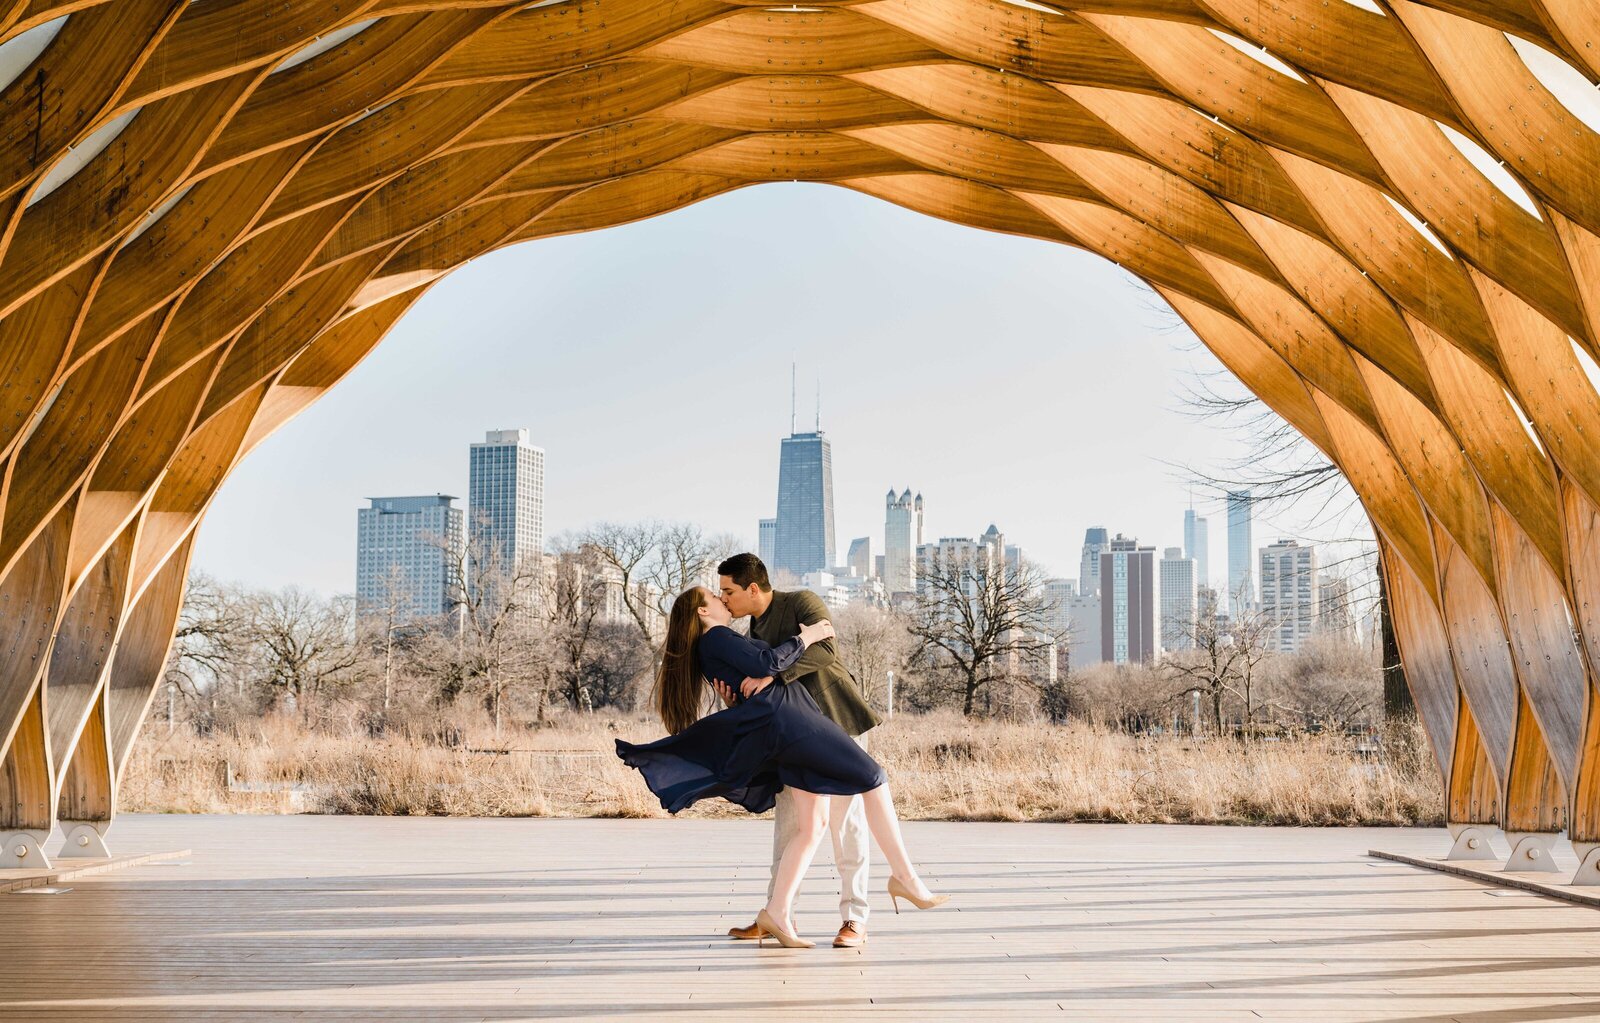 Couple dipping at honeycomb sculpture in Lincoln Park